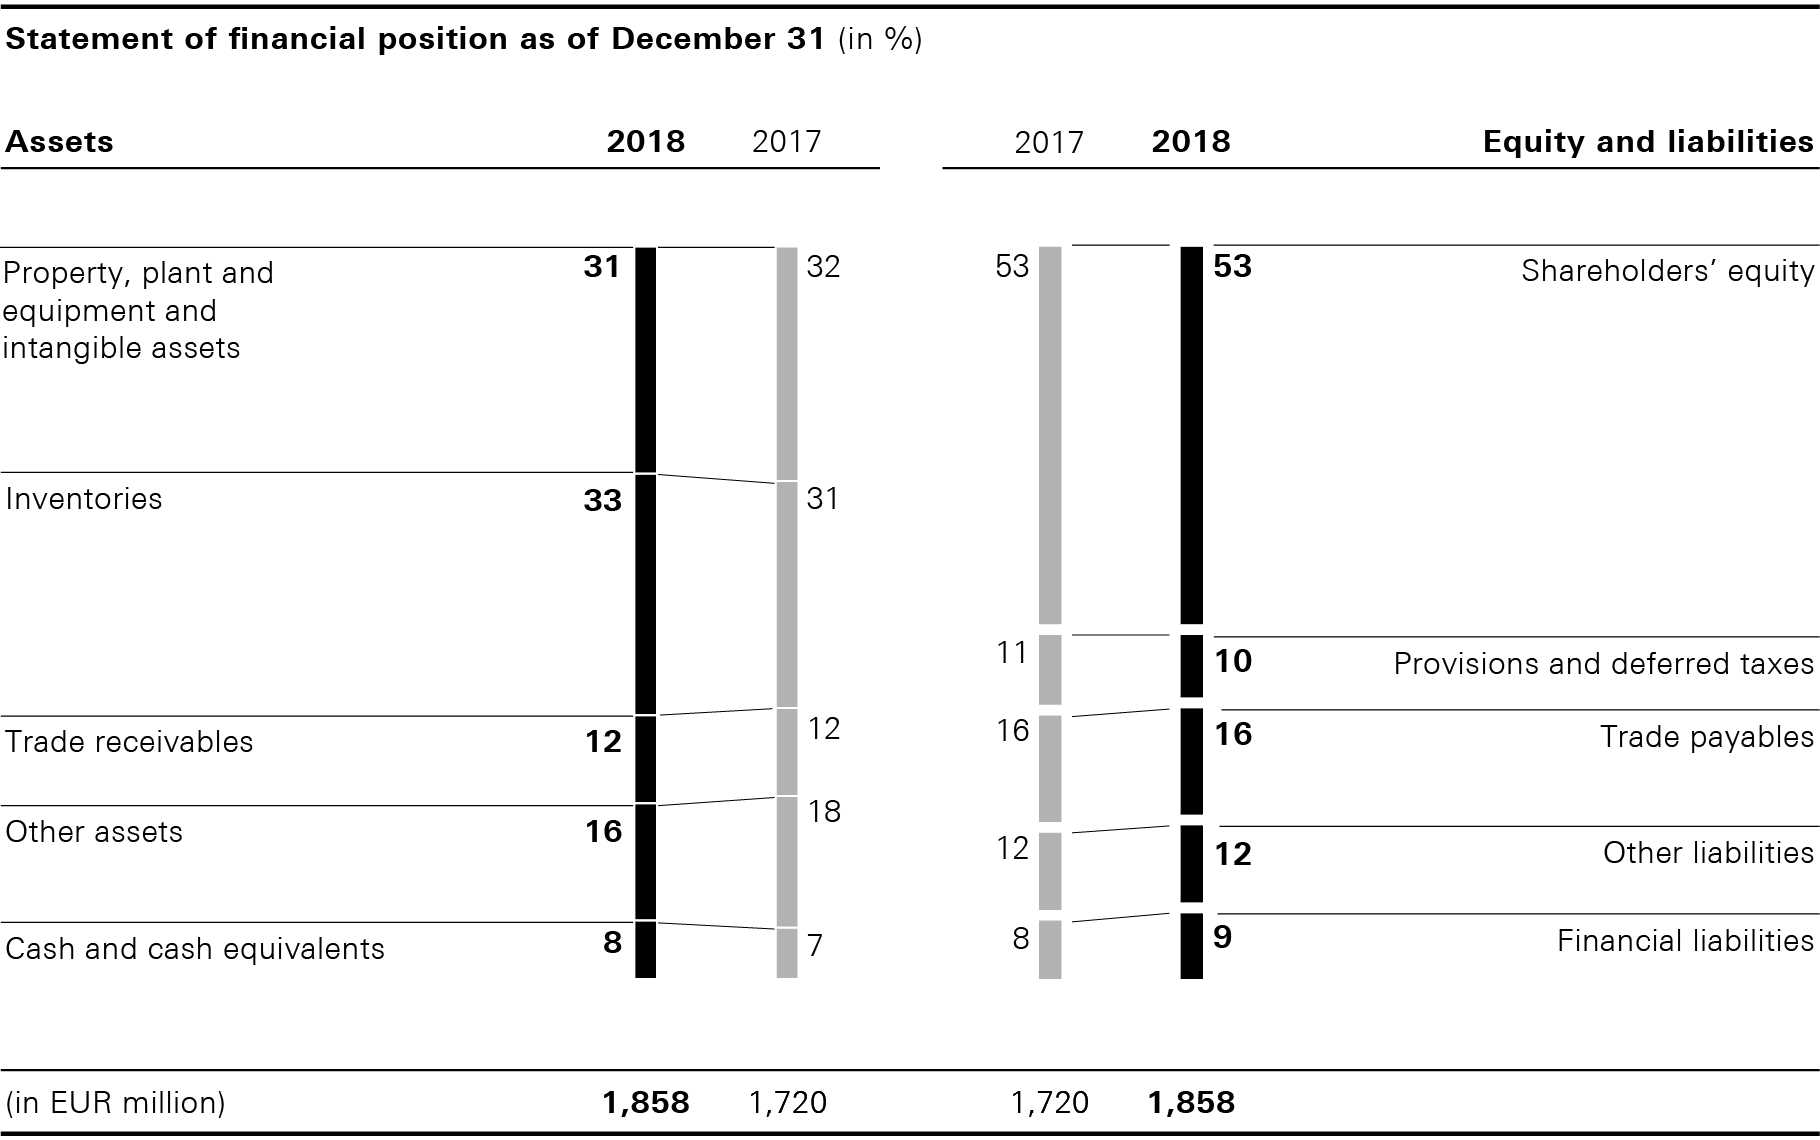 Statement of financial position as of December 31 (bar chart)